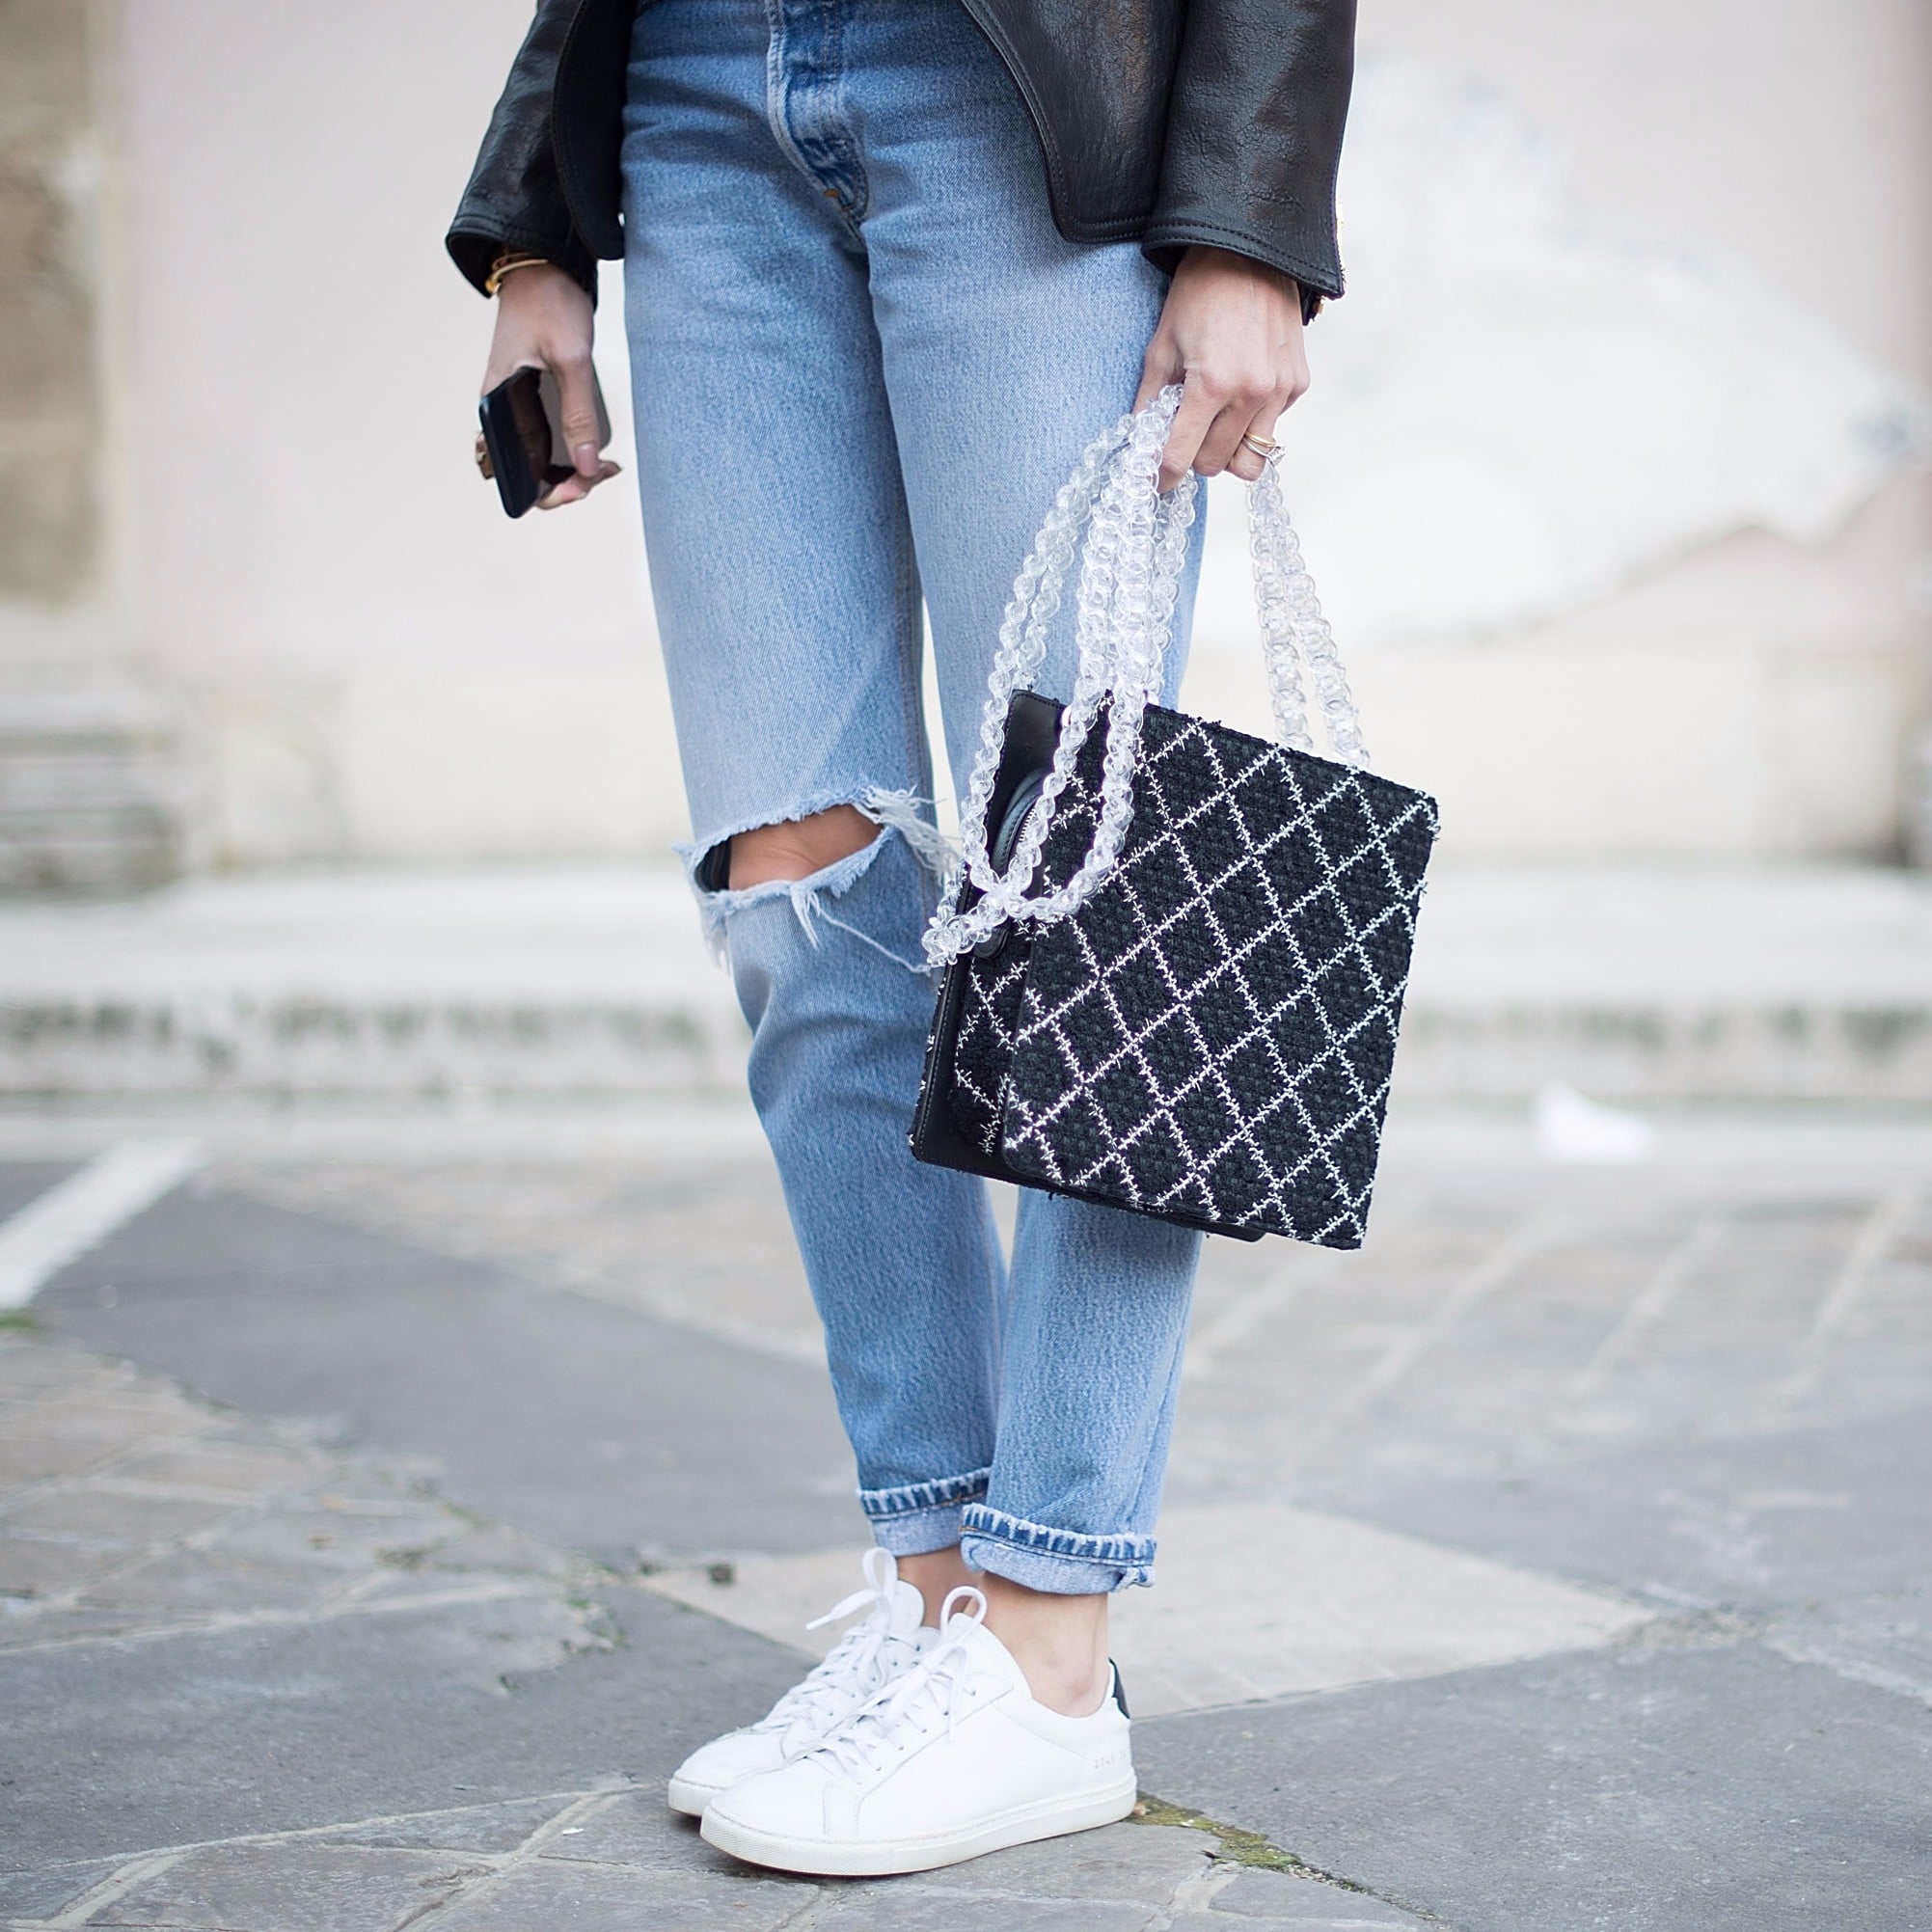 Best Shoes To Wear With Jeans | Popsugar Fashion